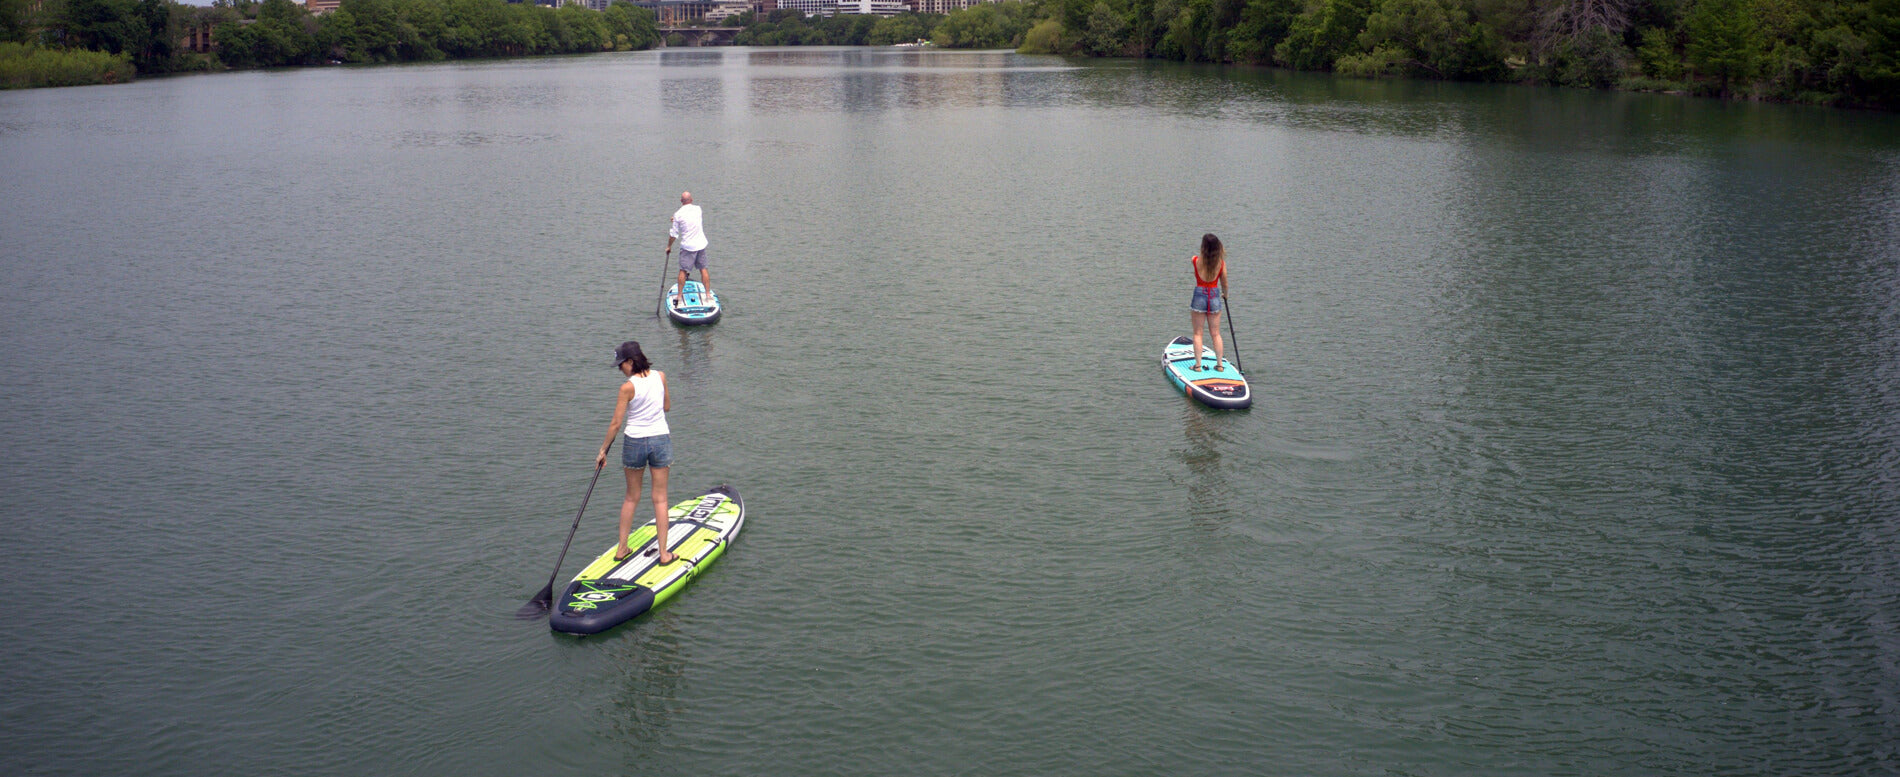 Man and a woman paddle boarding on a river